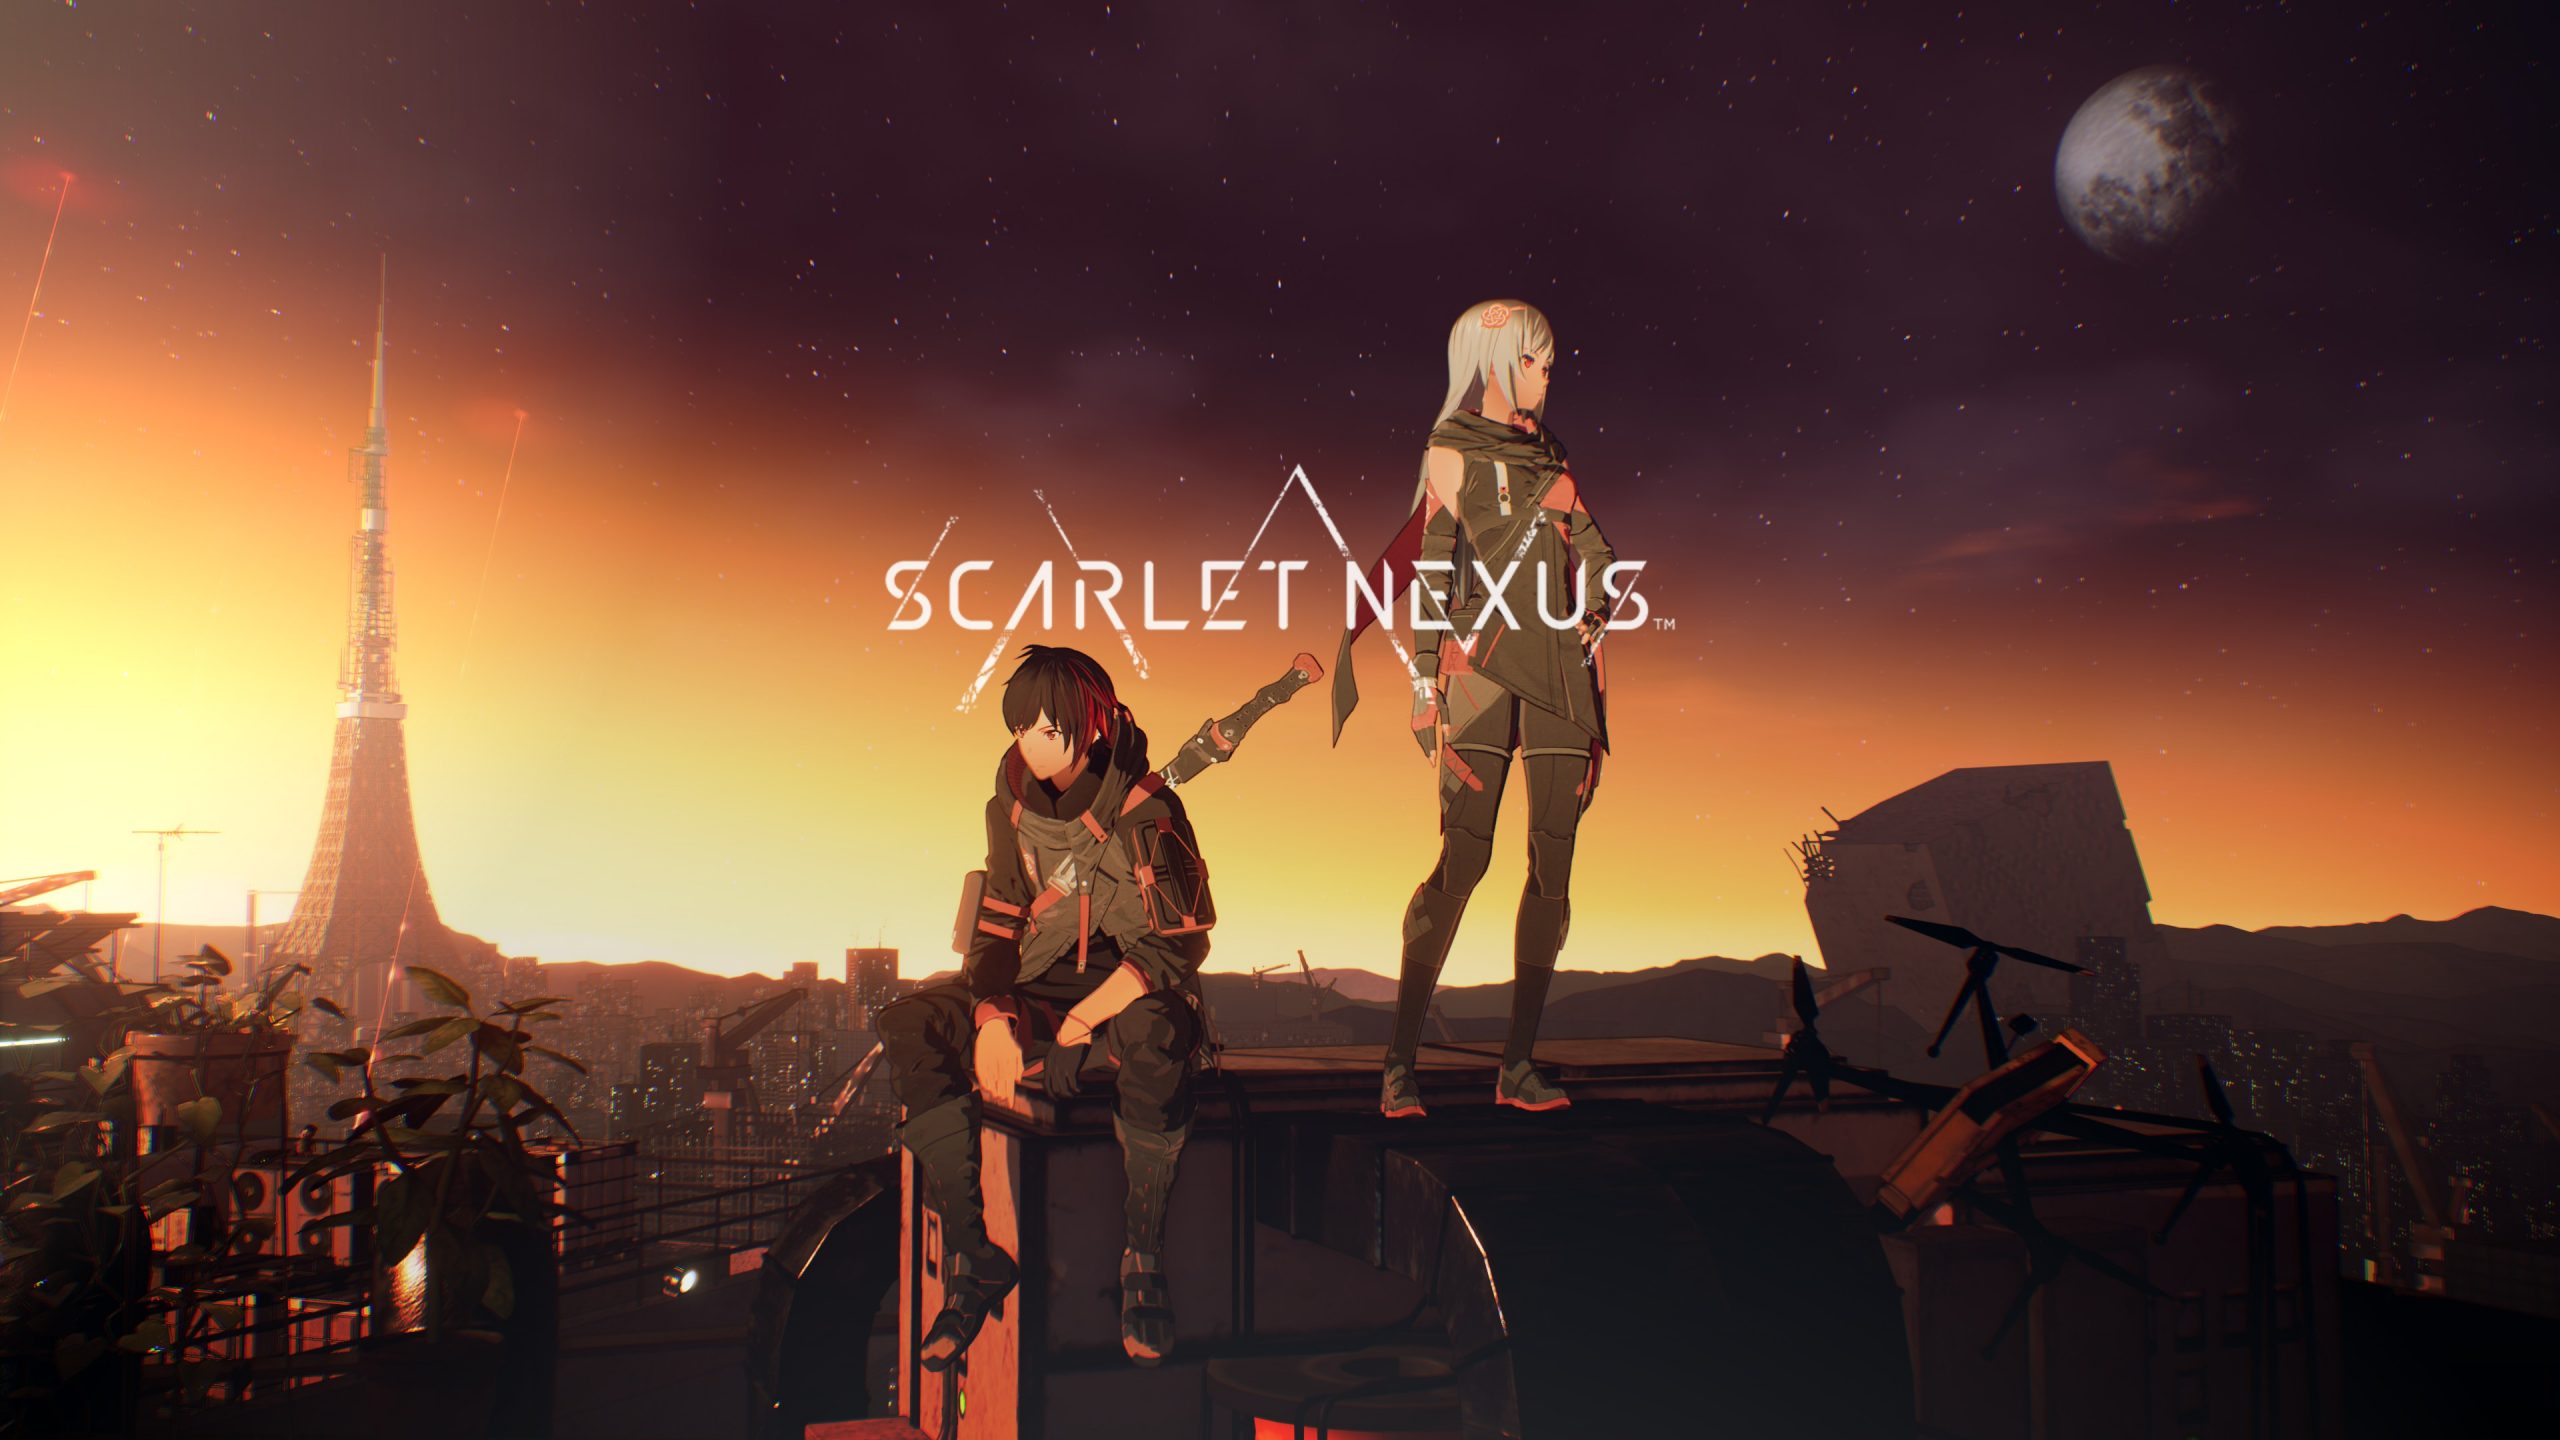 Dive deeper into SCARLET NEXUS's universe with a new gameplay video